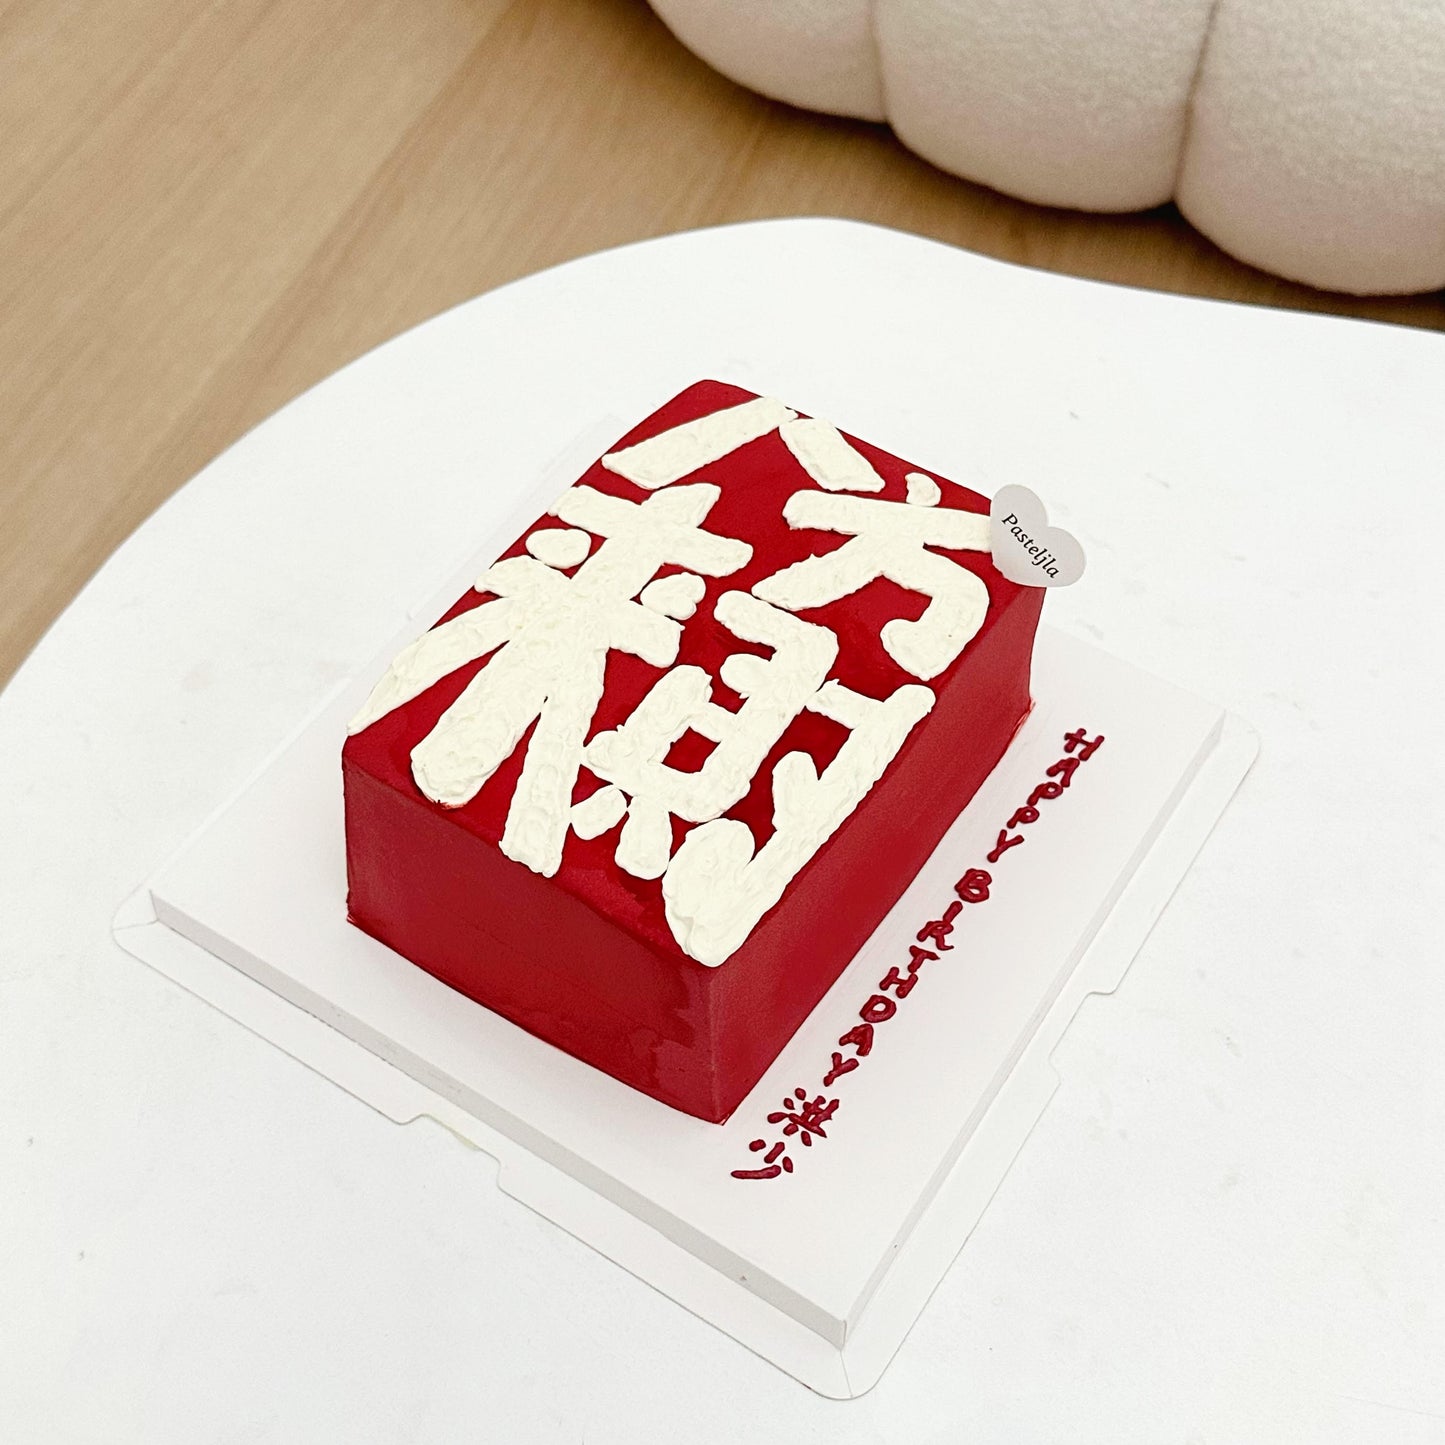 Get Rich Rectangle Cake